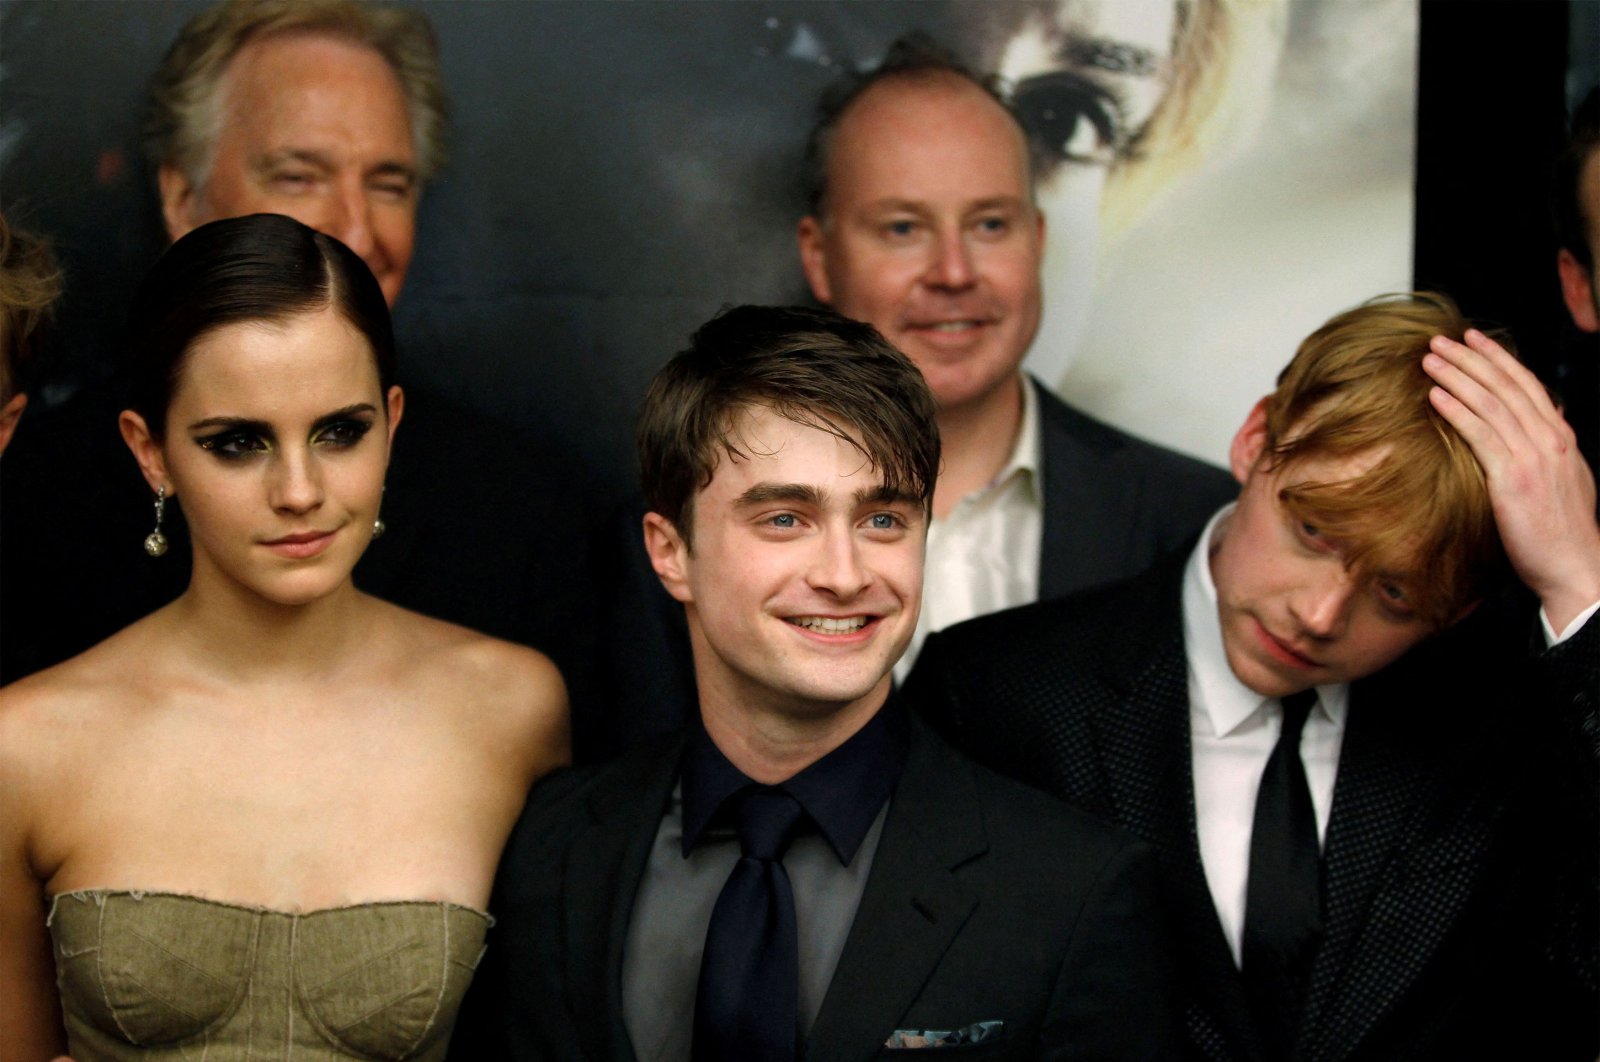 Cast members Rupert Grint (R), Daniel Radcliffe and Emma Watson (L) arrive for the premiere of the film &quot;Harry Potter and the Deathly Hallows: Part 2&quot; in New York, July 11, 2011.  (REUTERS)